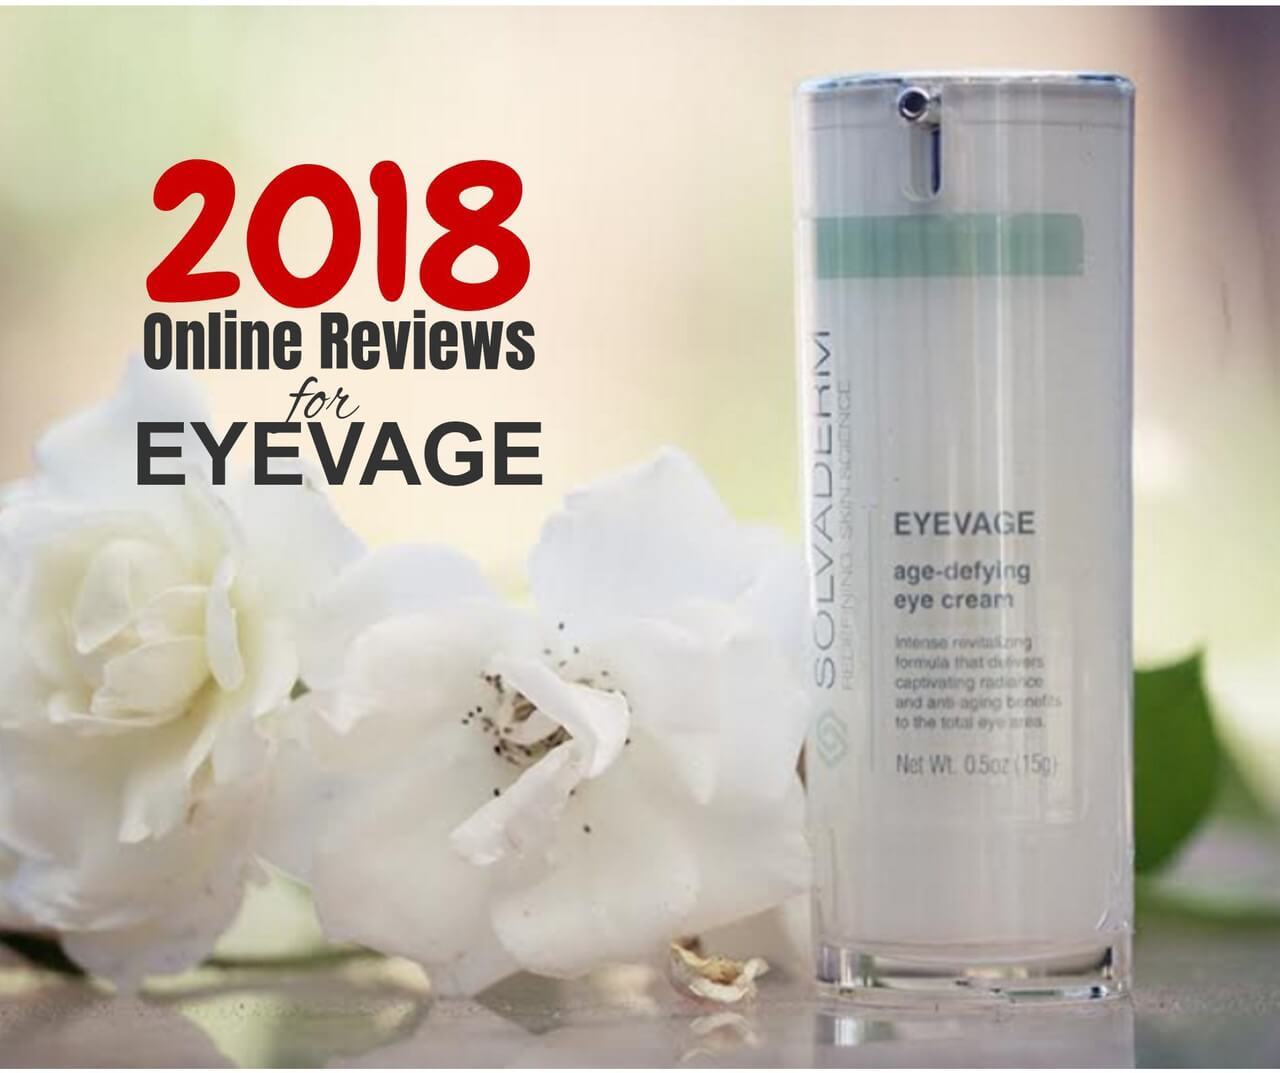 eyevage review for 2018